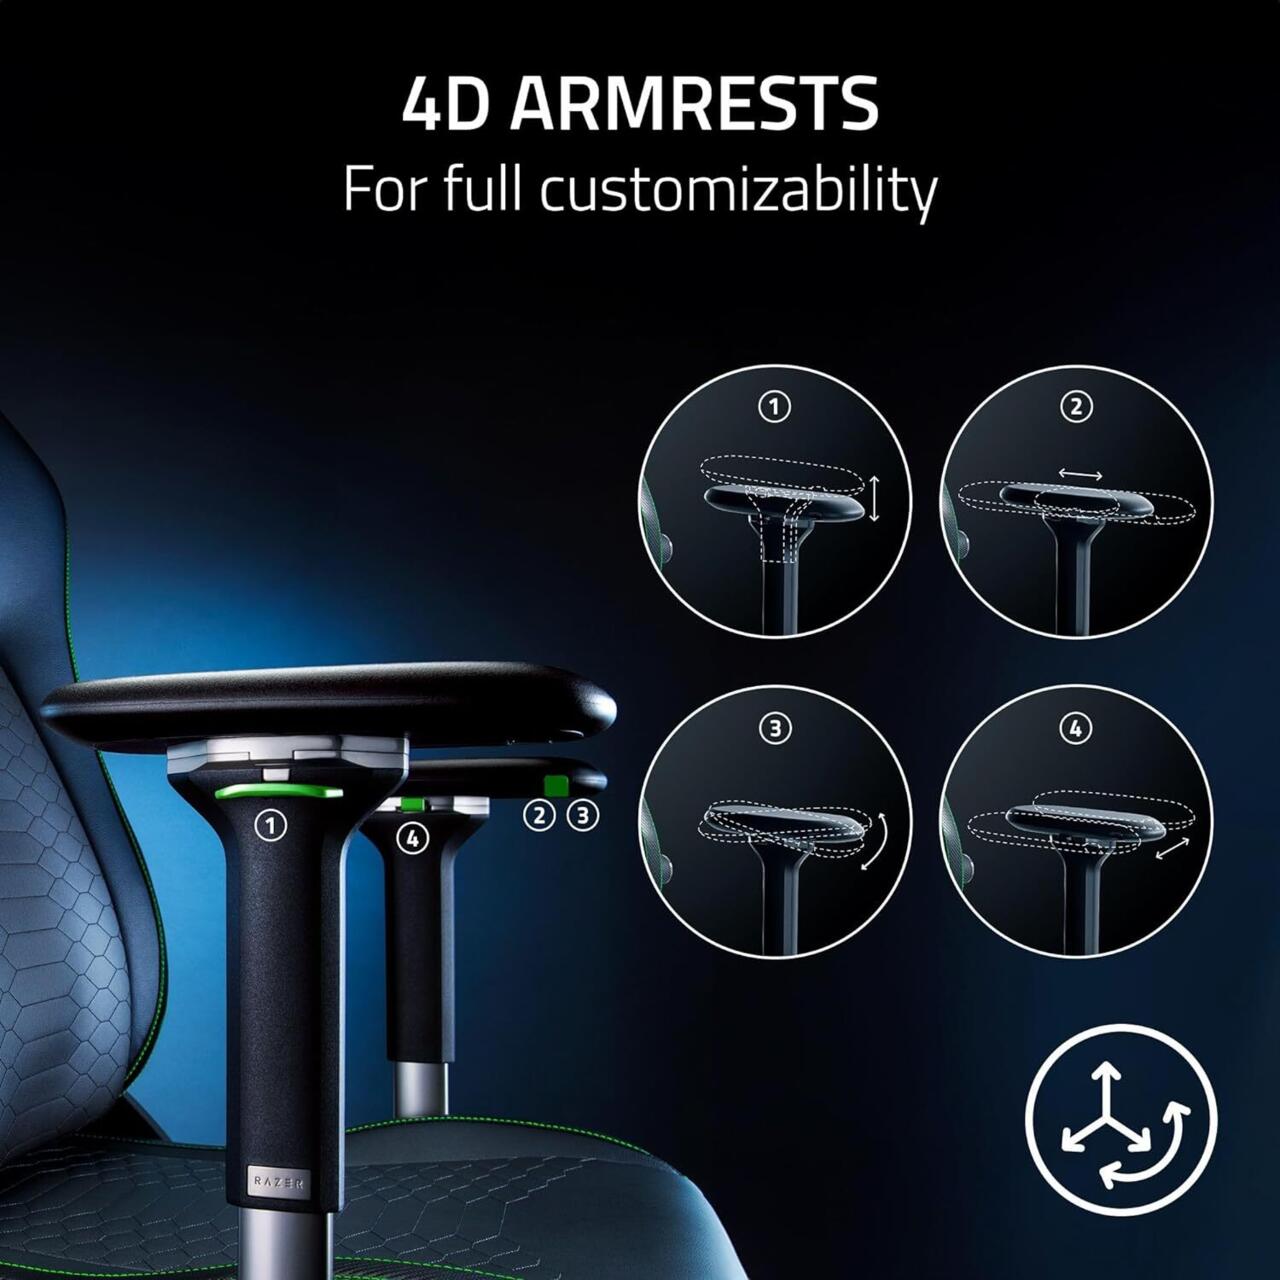 The 4D armrests provide a lot of flexibility.